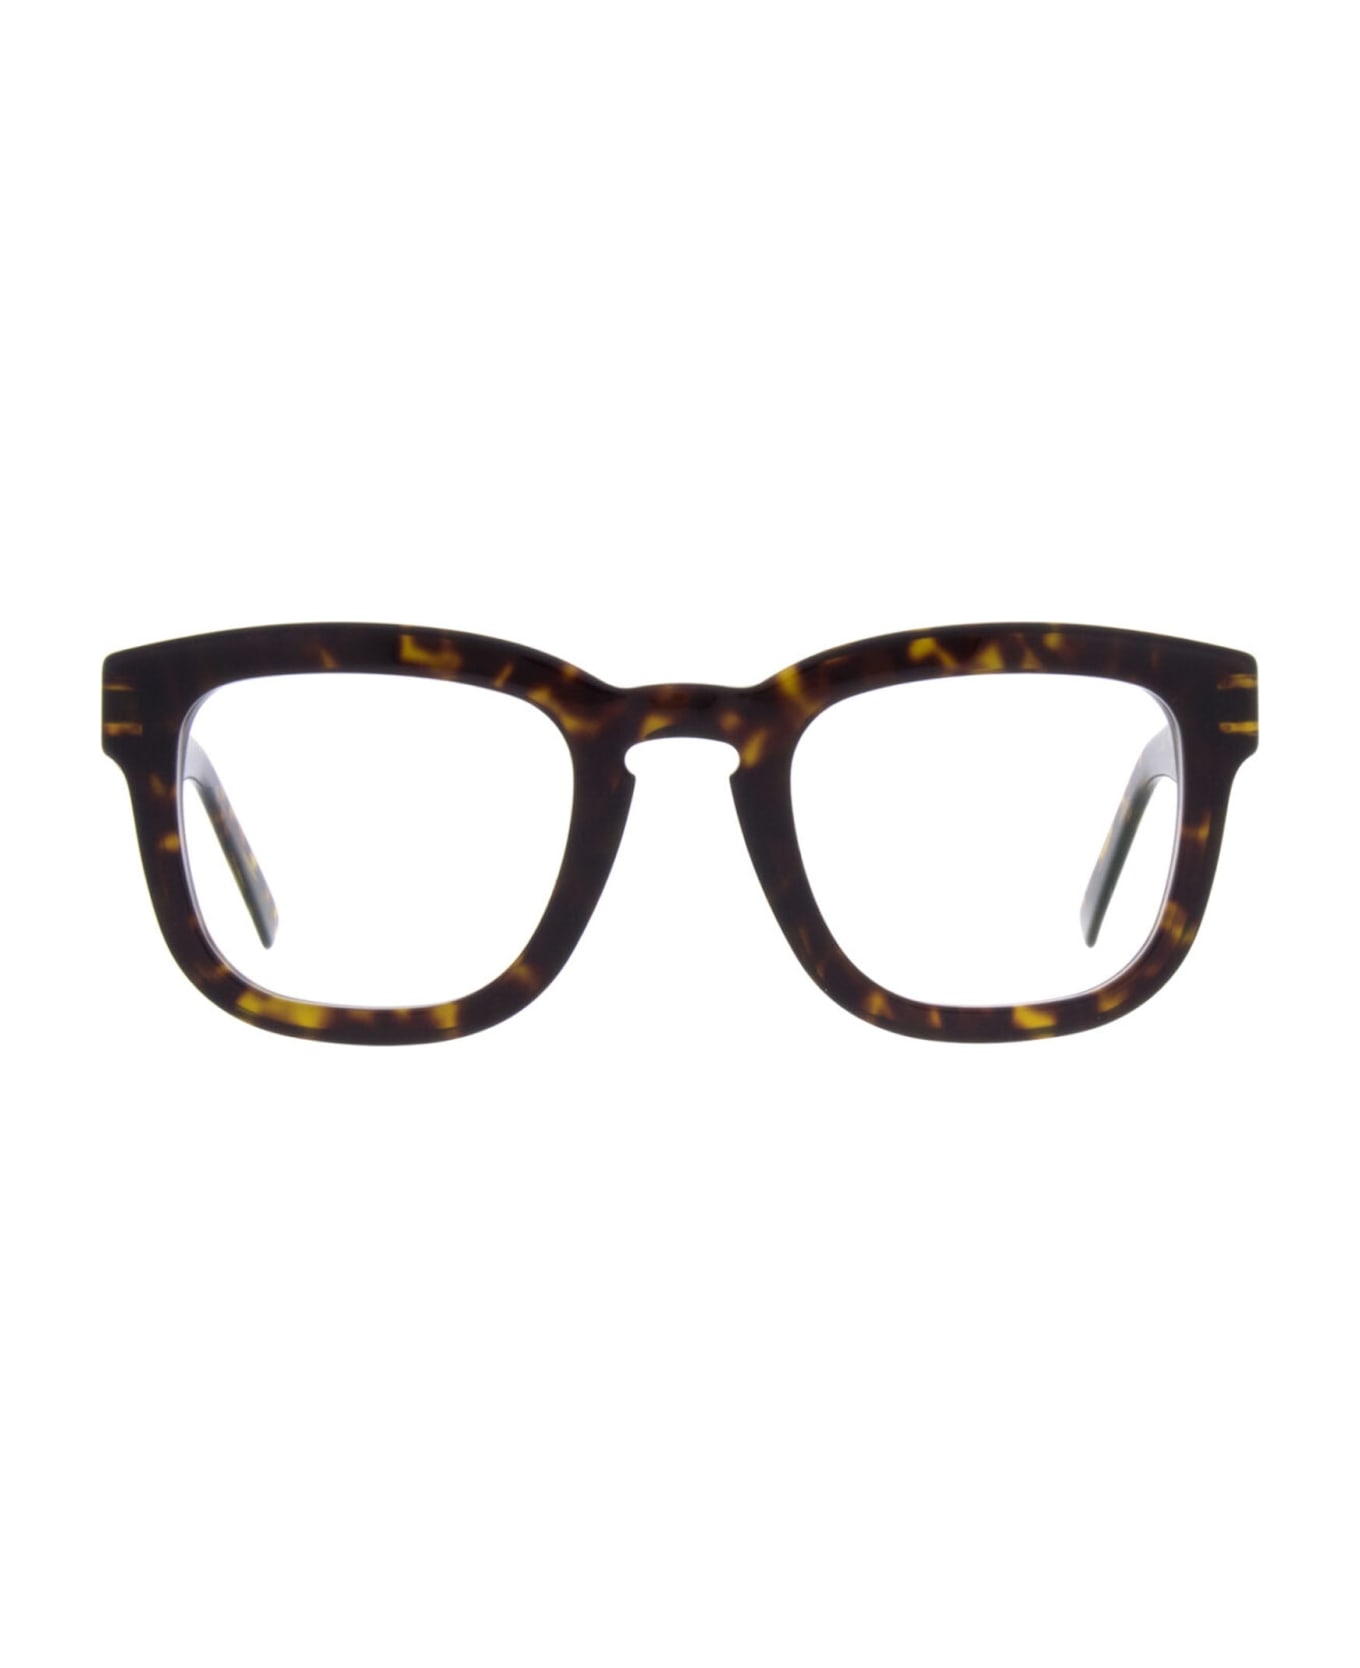 Andy Wolf Aw01 - Brown / Gold Glasses - brown tortoise